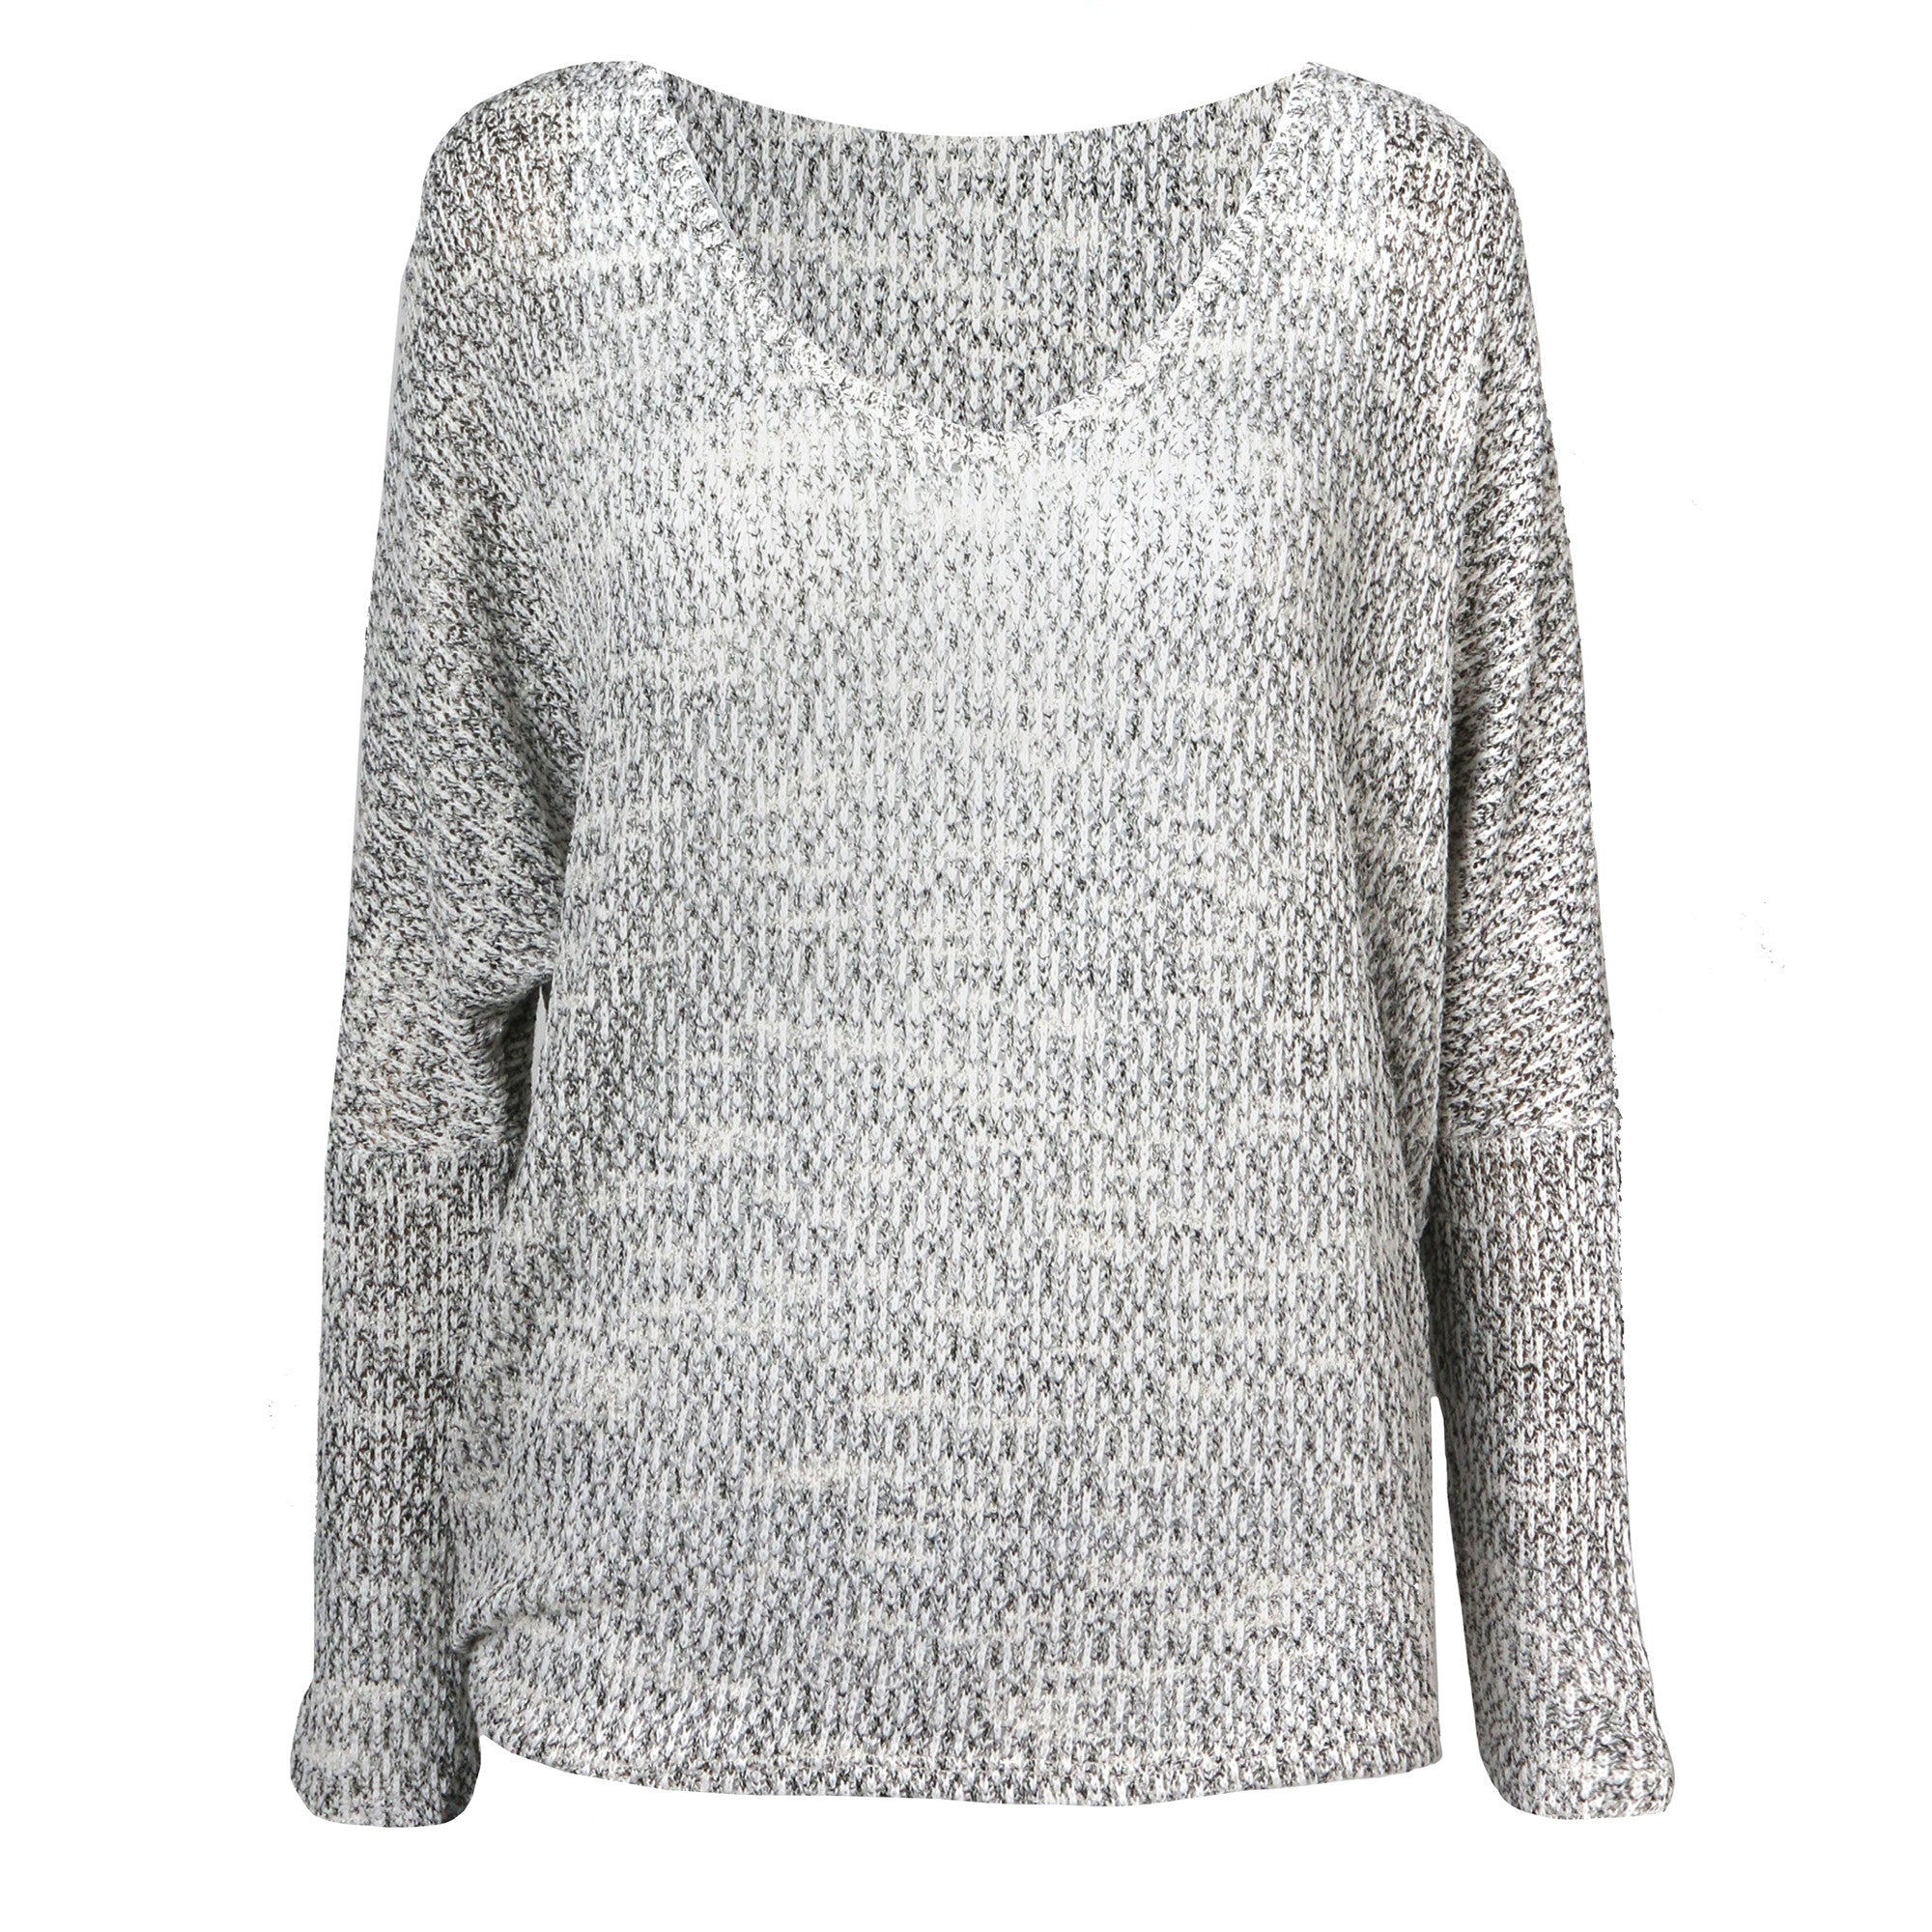 Marled Dolman Sweater Top - Large – 2020AVE